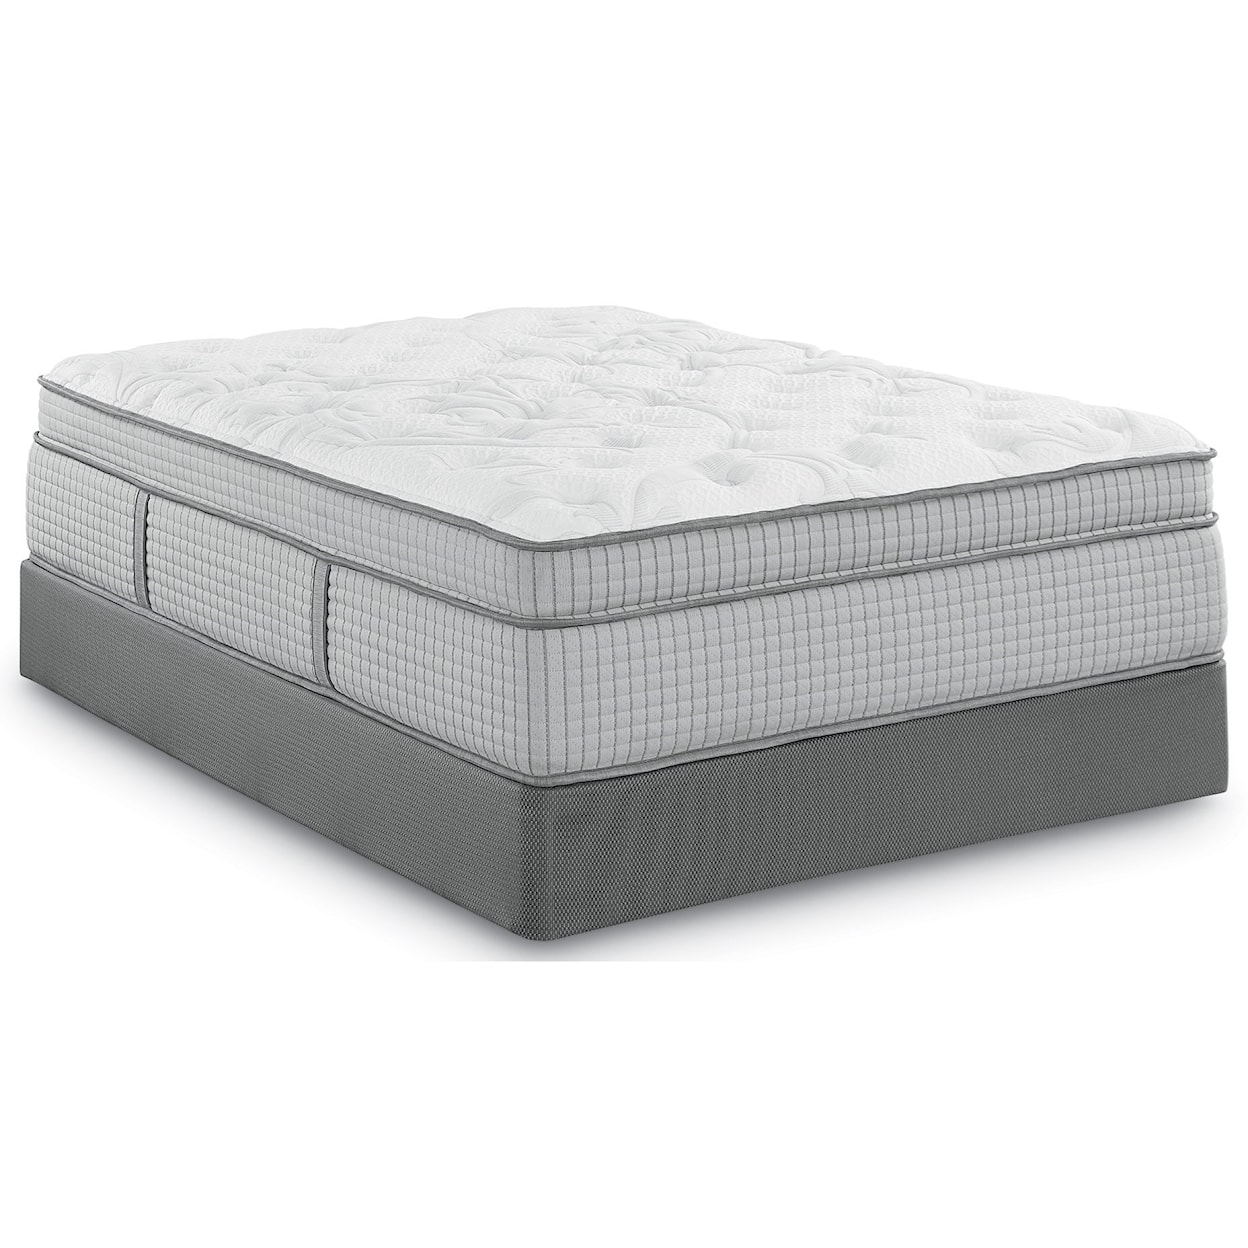 Restonic Biltmore House Euro Top King Euro Top Coil on Coil Mattress Set